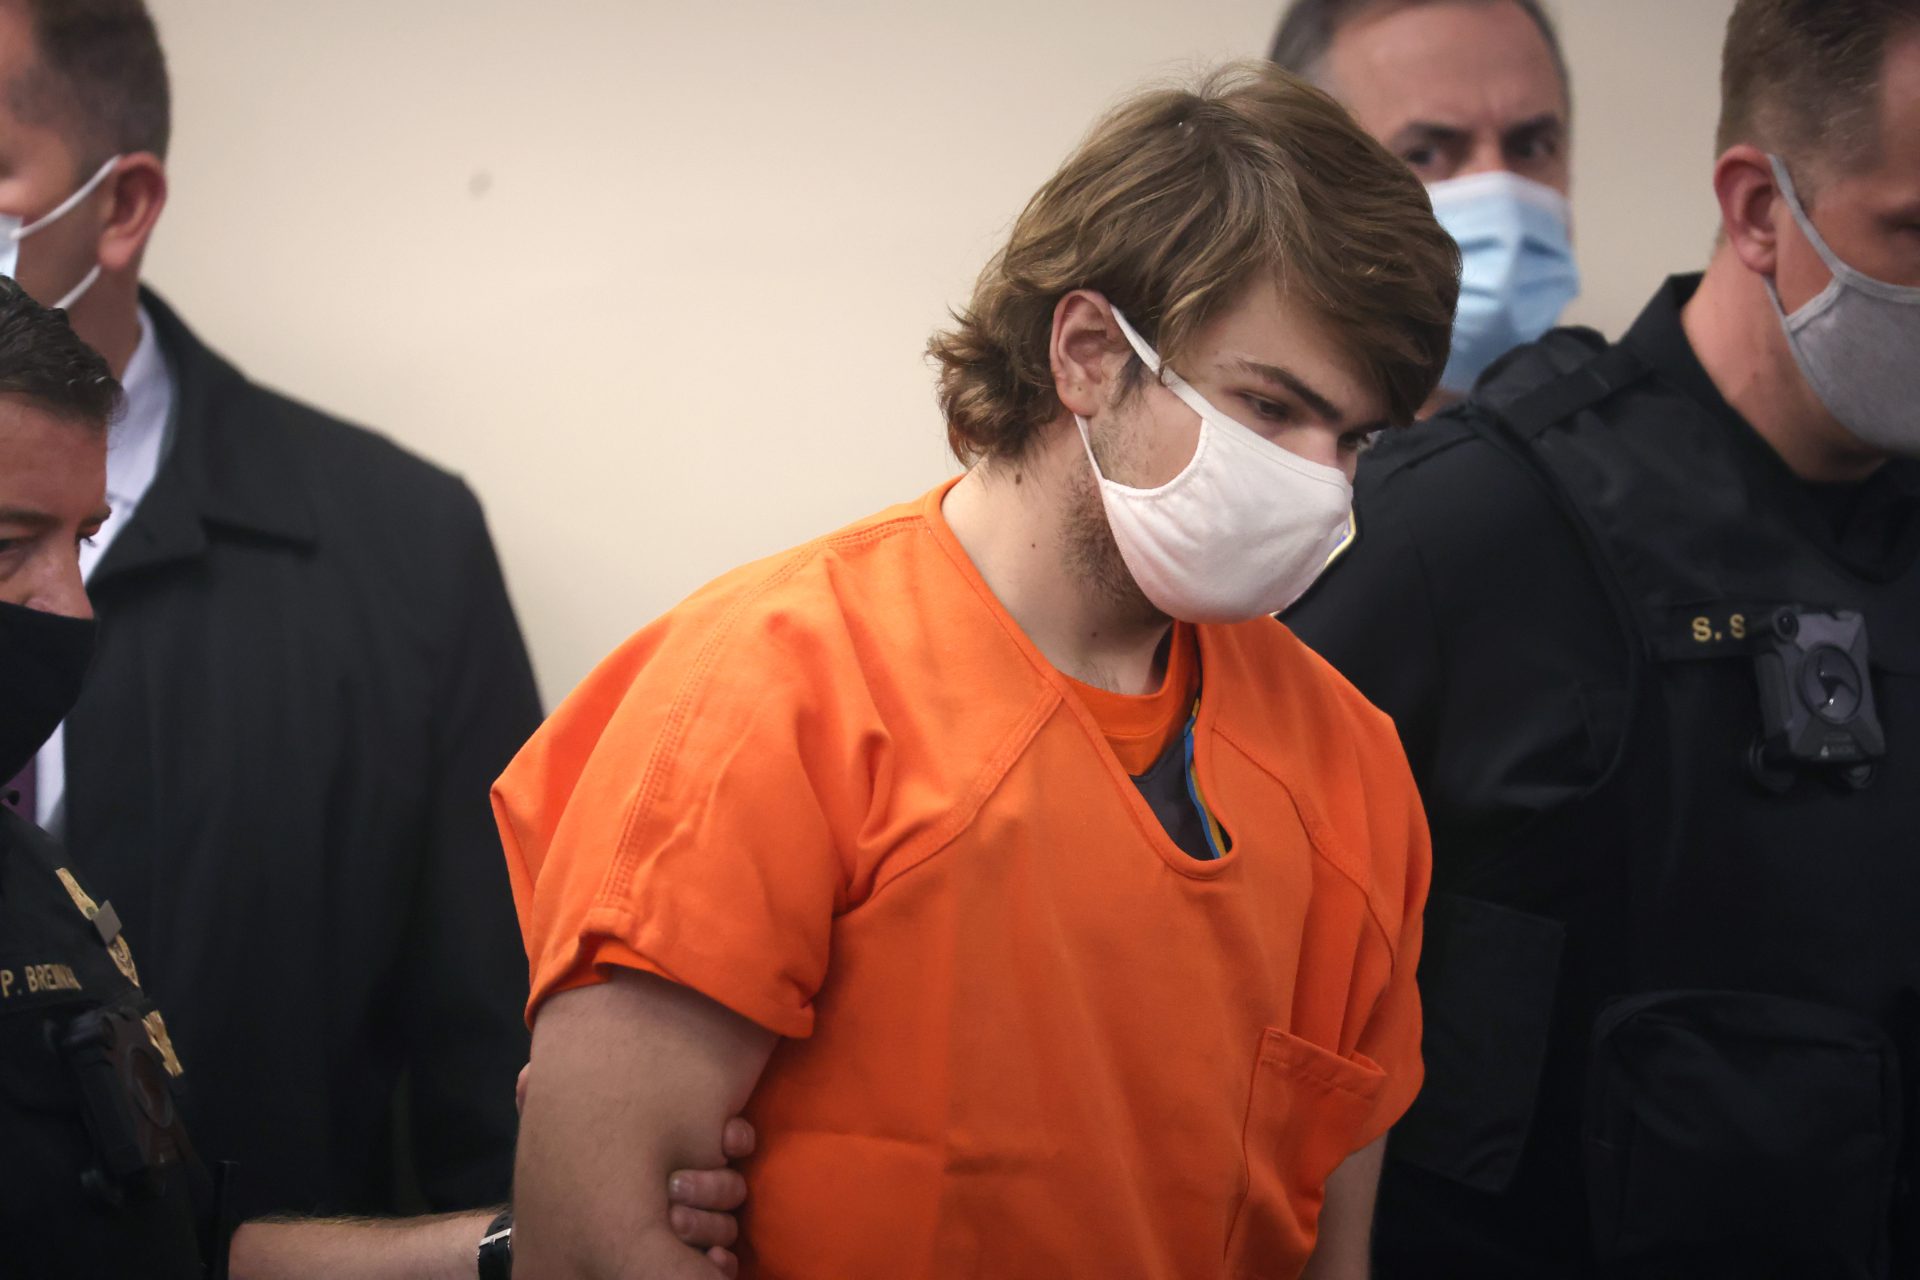 Social Platforms Will Face Lawsuits For Radicalizing Mass Shooter scaled